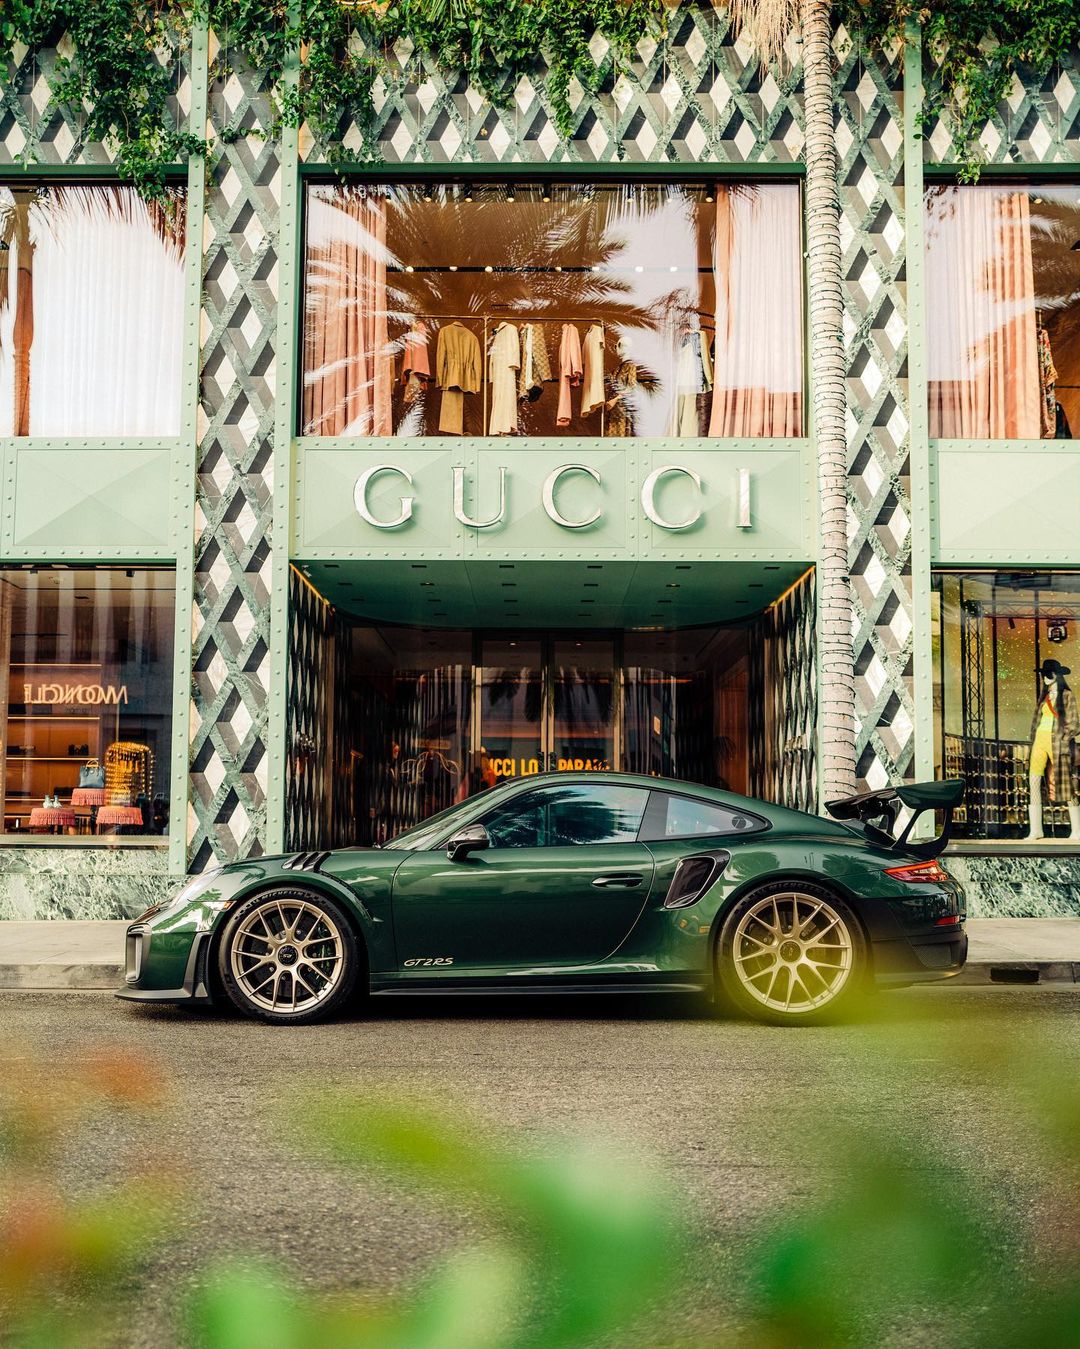 Green 911 parked in front of a green Gucci storefront